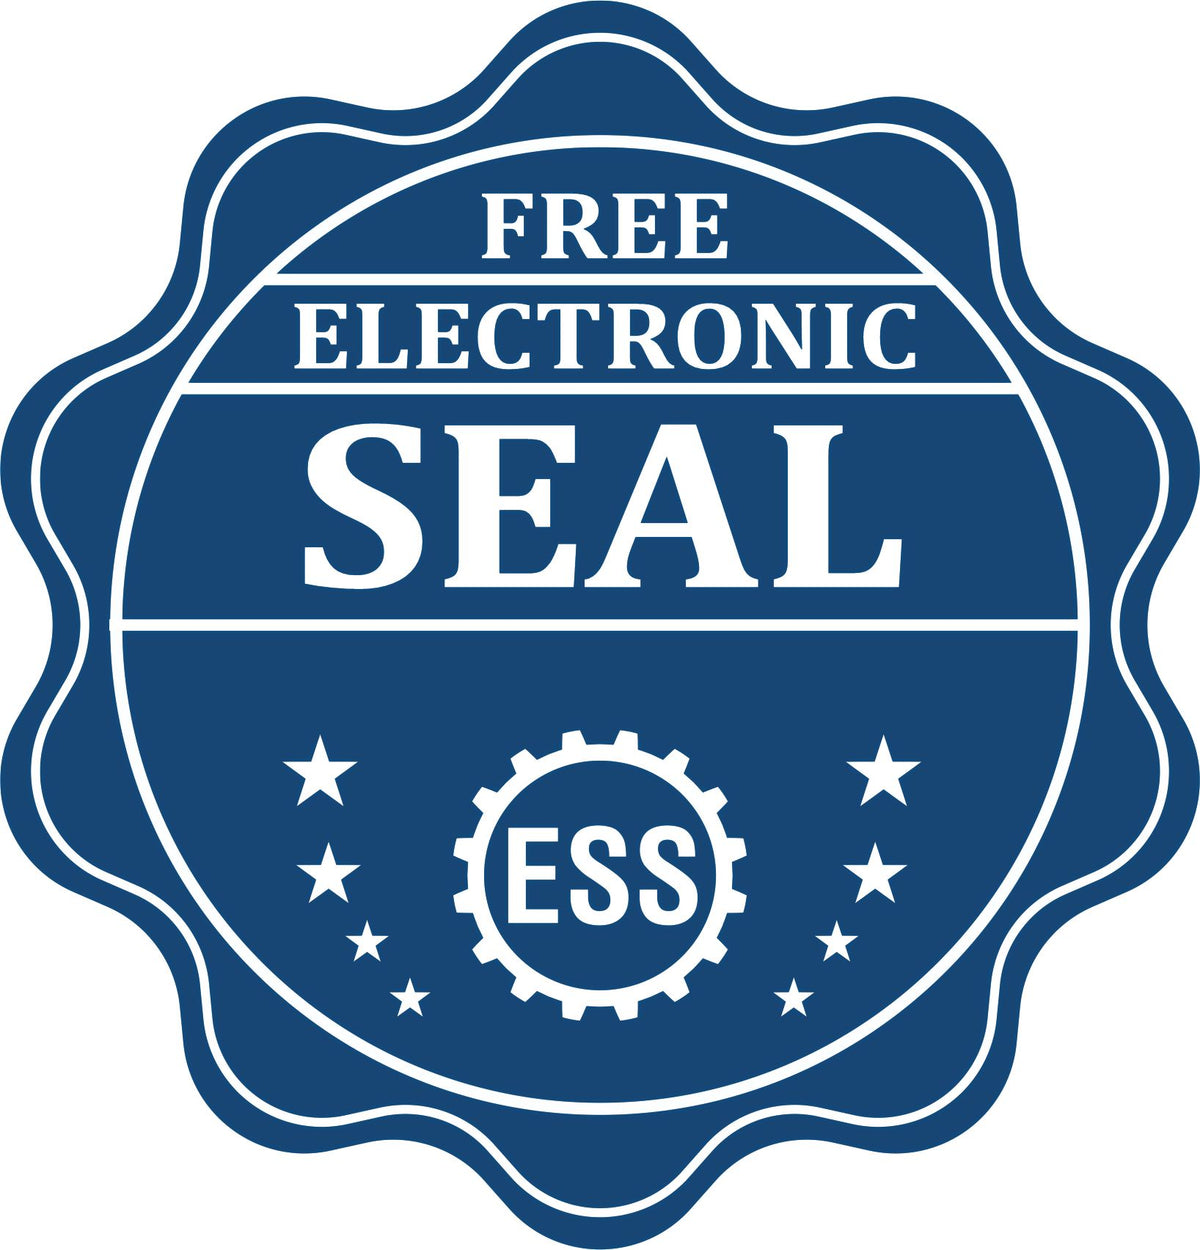 A badge showing a free electronic seal for the Hybrid Alaska Landscape Architect Seal with stars and the ESS gear on the emblem.